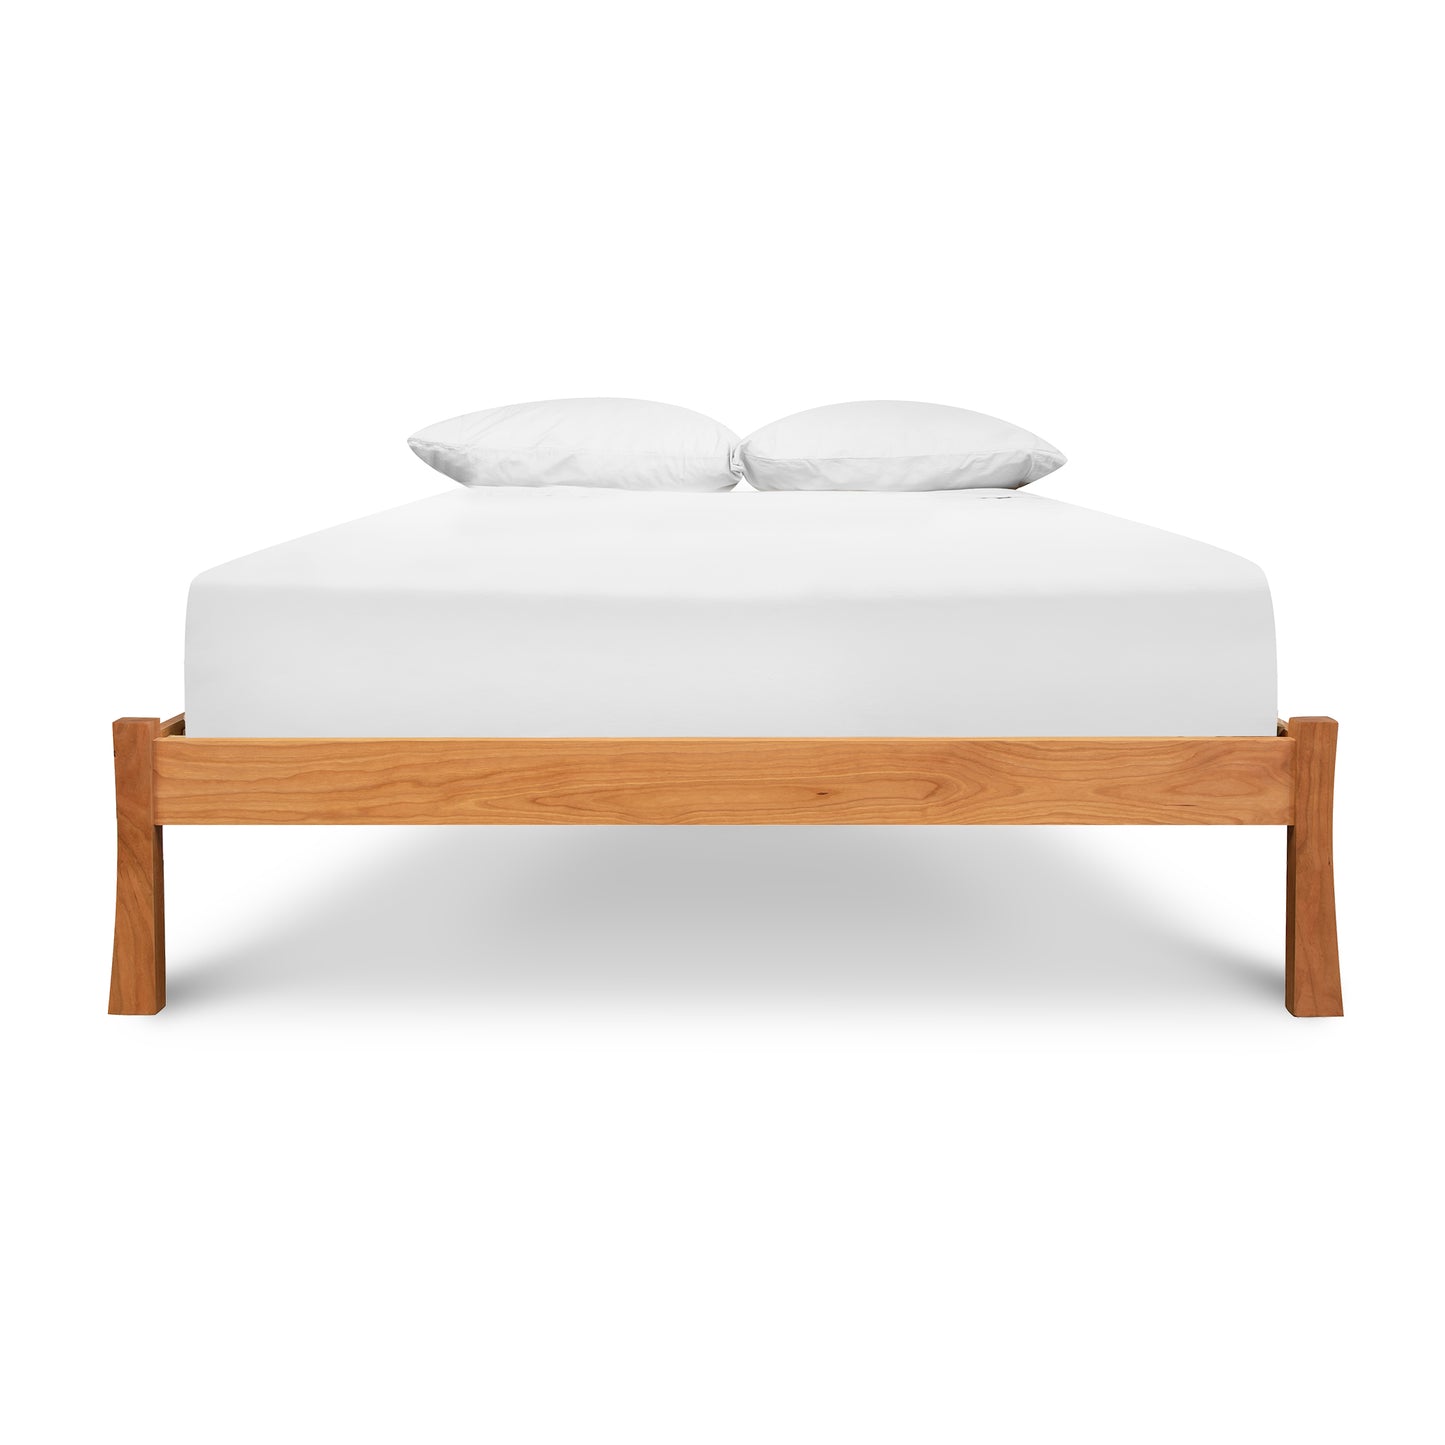 A minimalist Vermont Furniture Designs Contemporary Craftsman Studio-Style Platform Bed with white sheets, perfect for a contemporary bedroom.